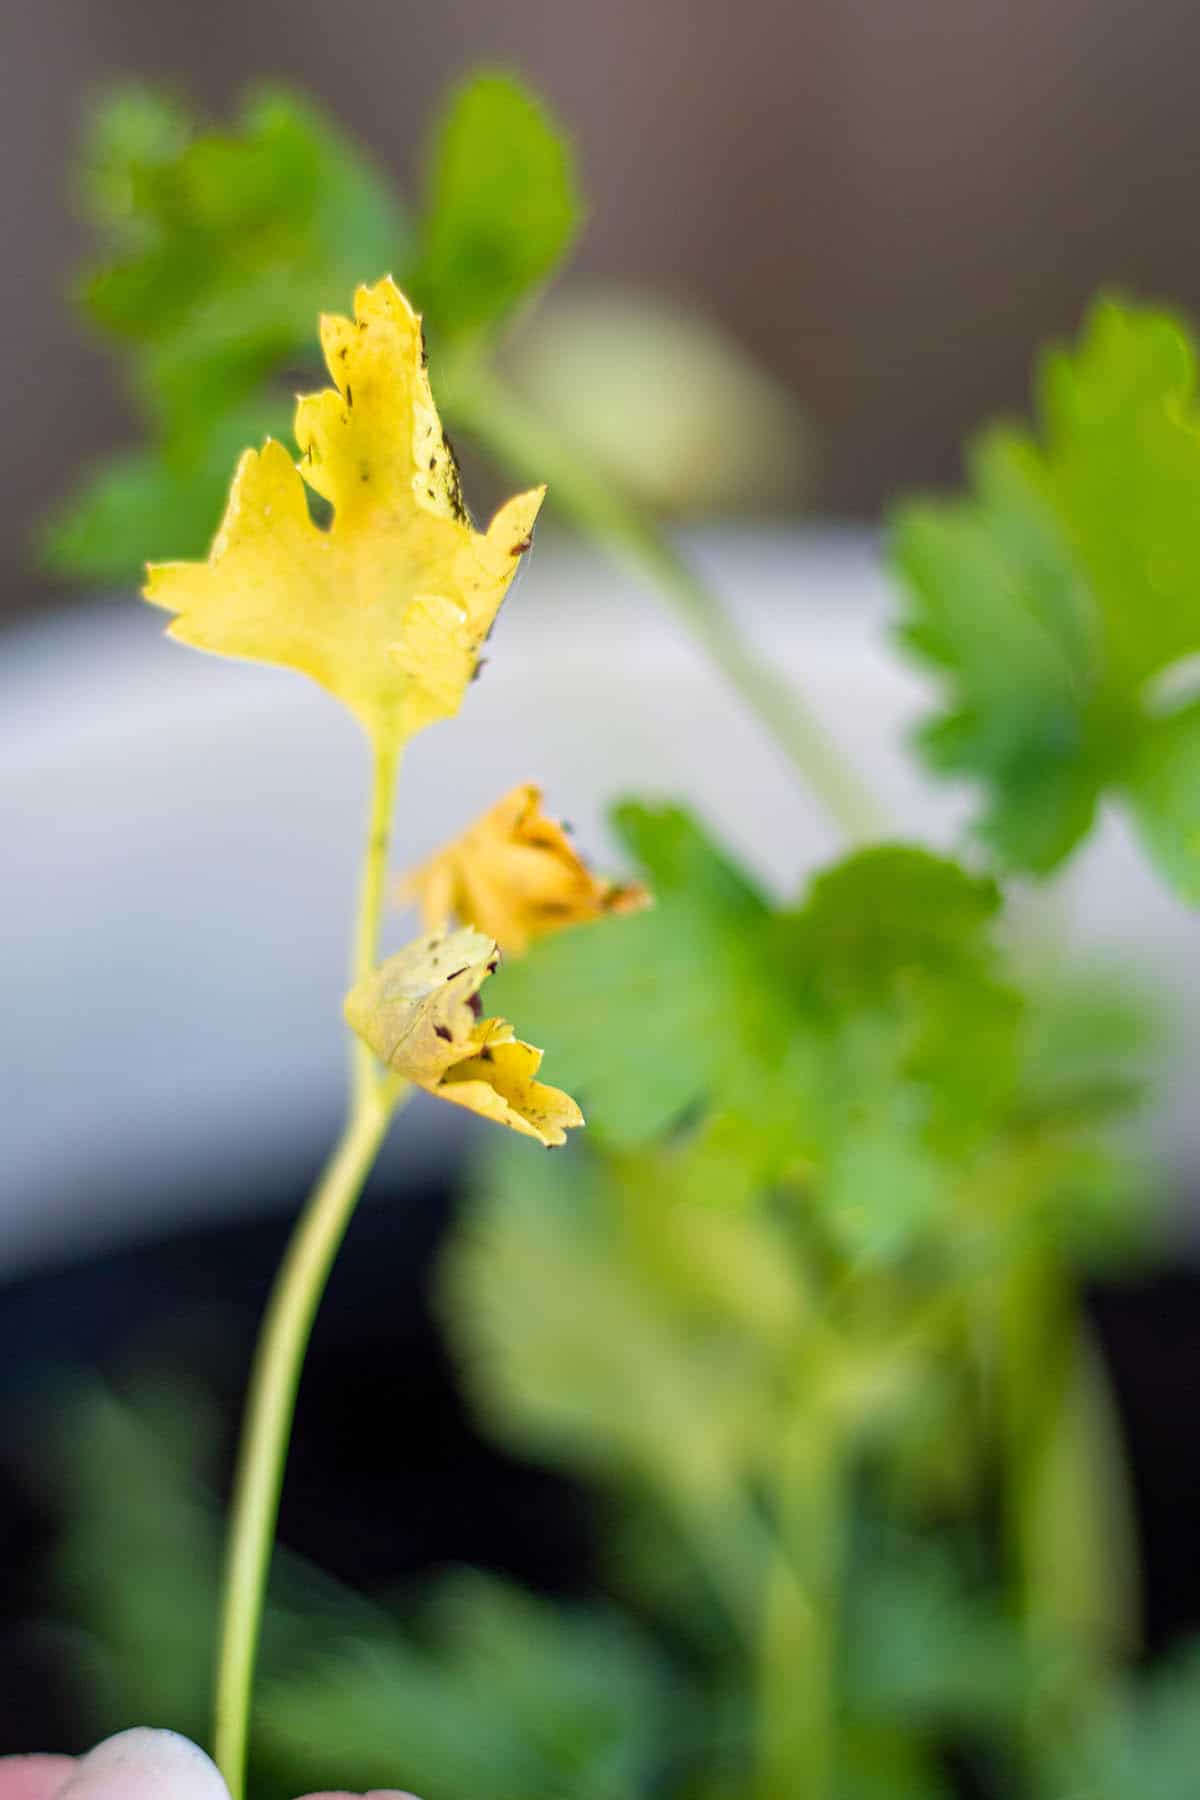 Parsley leaves that have turned yellow and no longer good.